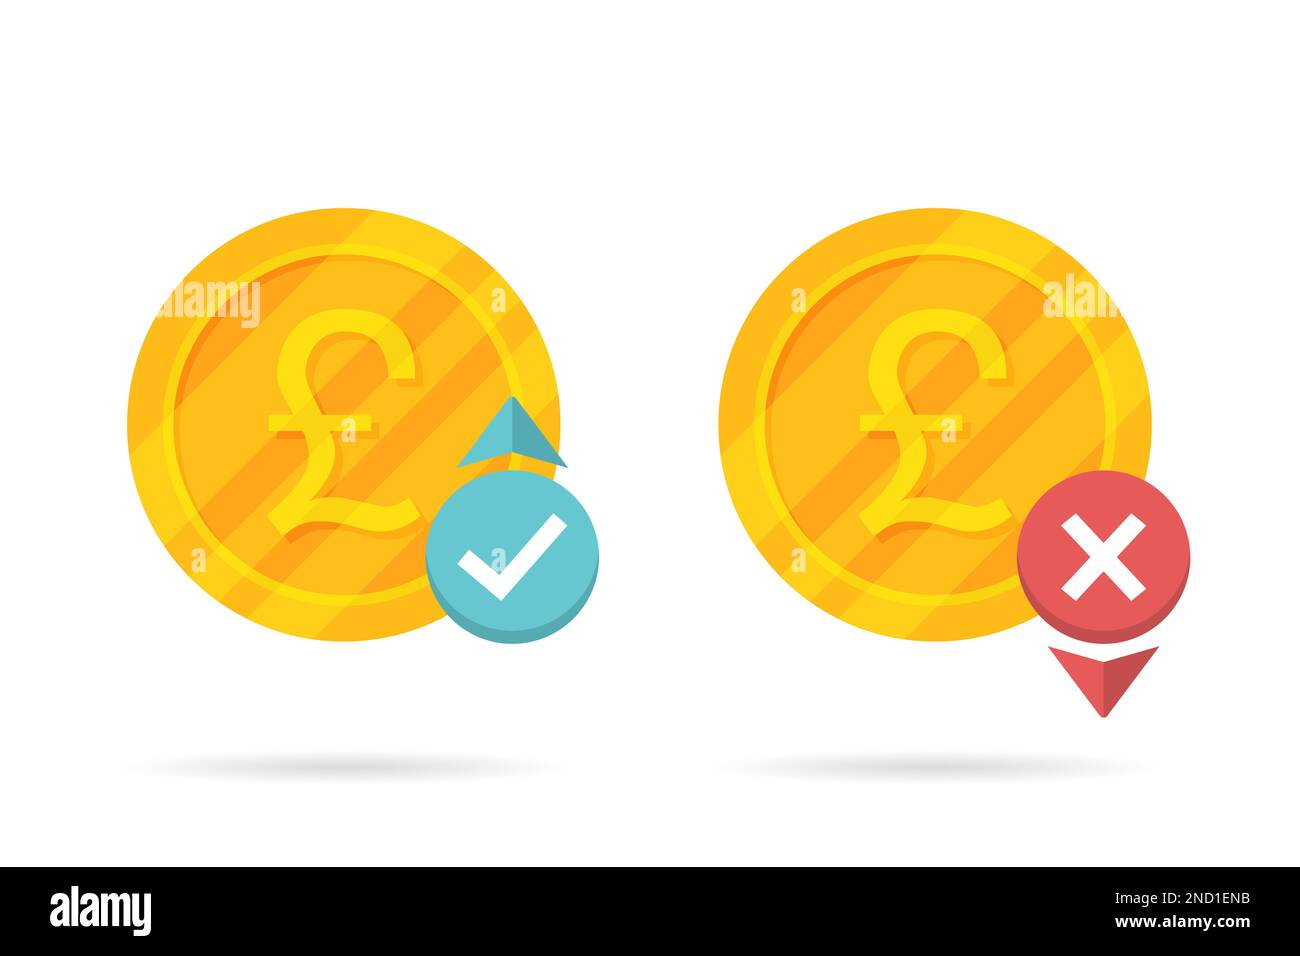 Up and down pound money icon with shadow Stock Vector